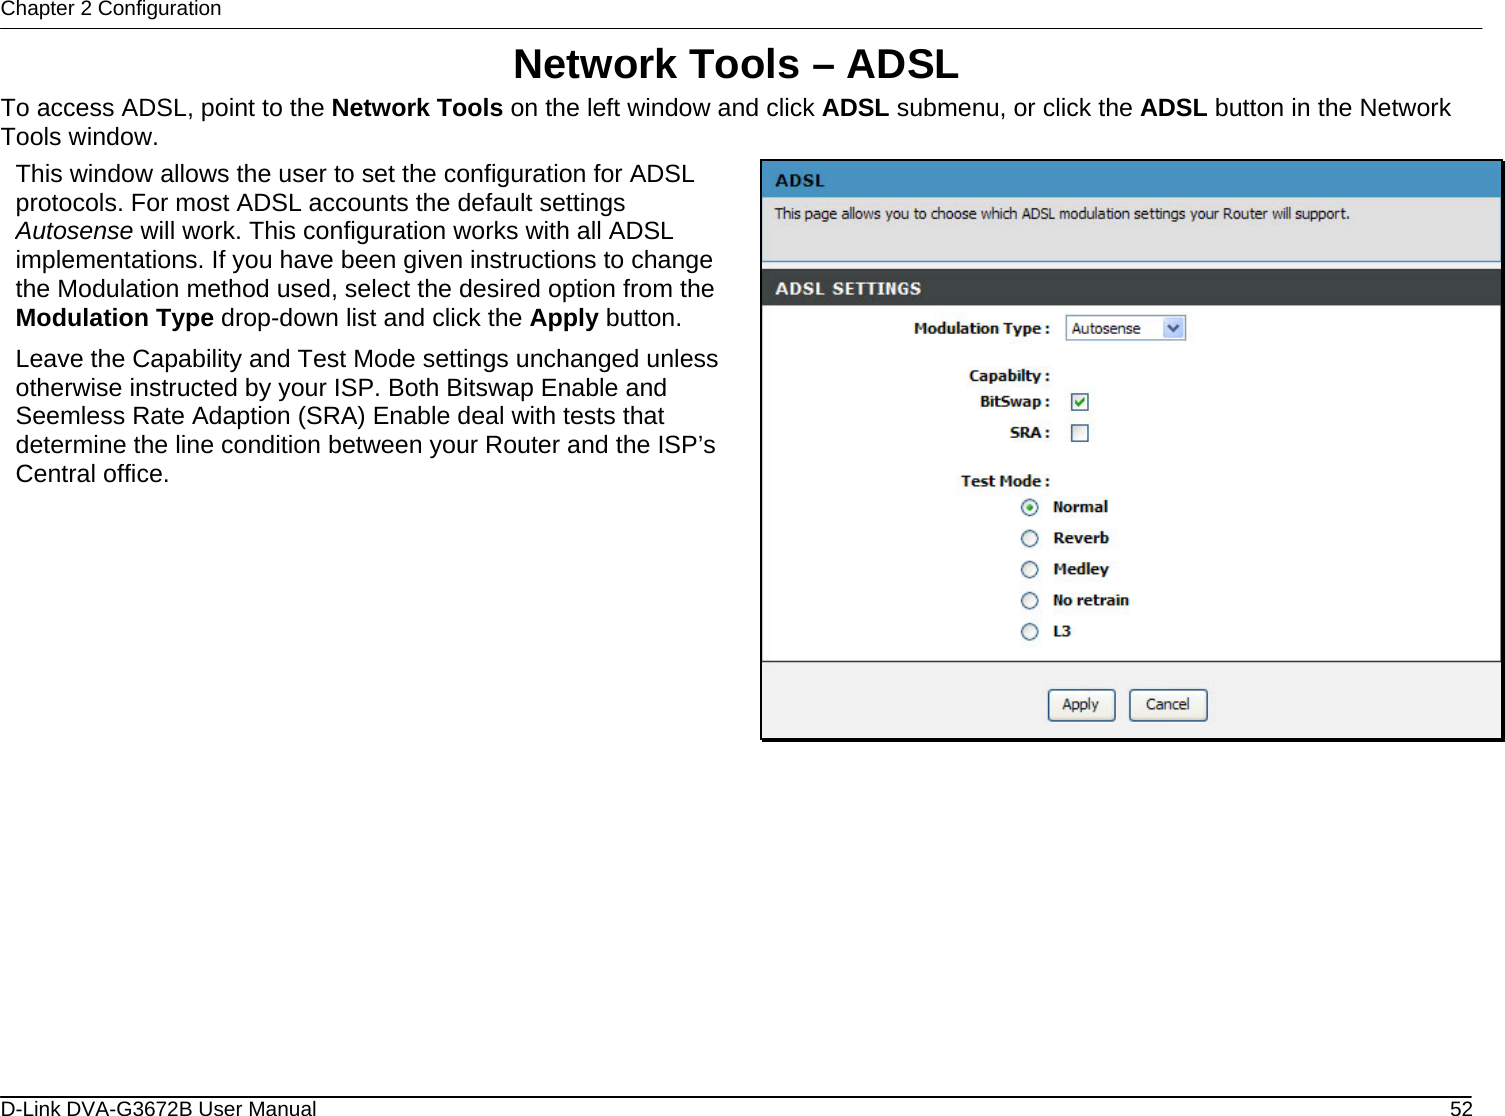 Chapter 2 Configuration Network Tools – ADSL To access ADSL, point to the Network Tools on the left window and click ADSL submenu, or click the ADSL button in the Network Tools window. This window allows the user to set the configuration for ADSL protocols. For most ADSL accounts the default settings Autosense will work. This configuration works with all ADSL implementations. If you have been given instructions to change the Modulation method used, select the desired option from the Modulation Type drop-down list and click the Apply button. Leave the Capability and Test Mode settings unchanged unless otherwise instructed by your ISP. Both Bitswap Enable and Seemless Rate Adaption (SRA) Enable deal with tests that determine the line condition between your Router and the ISP’s Central office.              D-Link DVA-G3672B User Manual  52